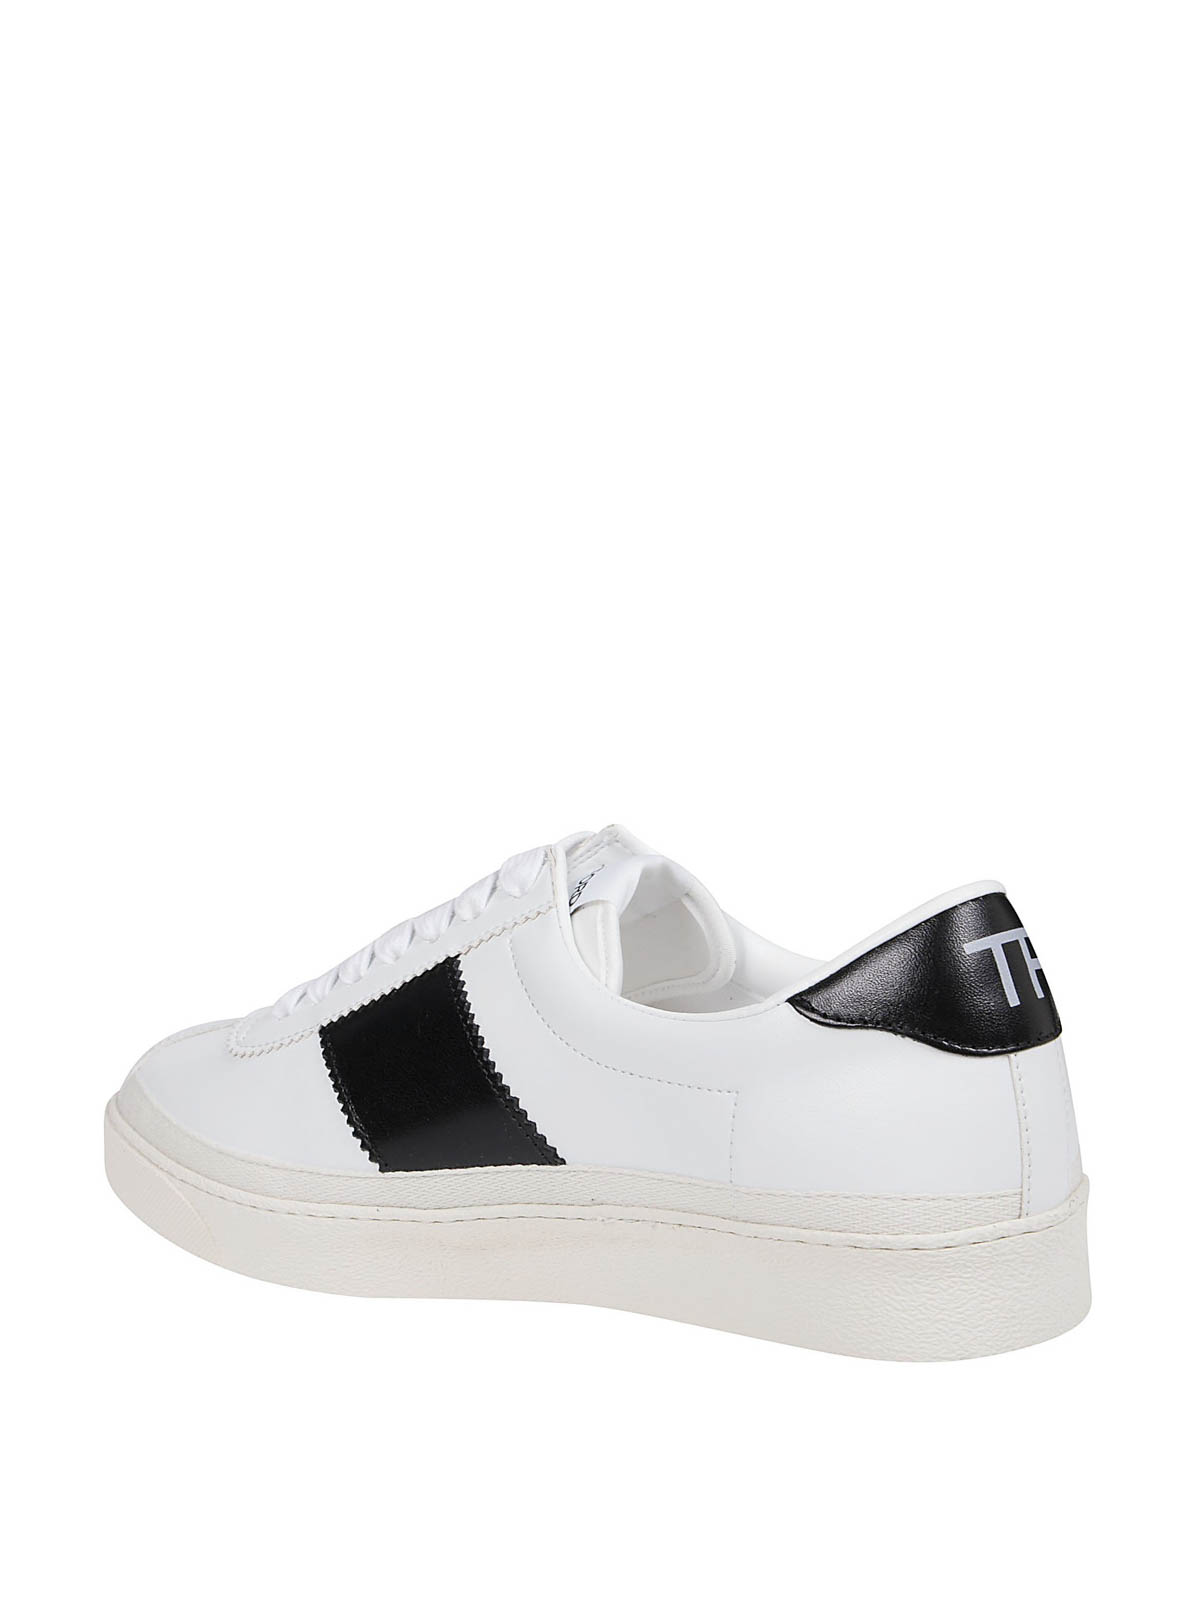 Trainers Tom Ford - Bannister sneakers - J1261TTAP001C1902 